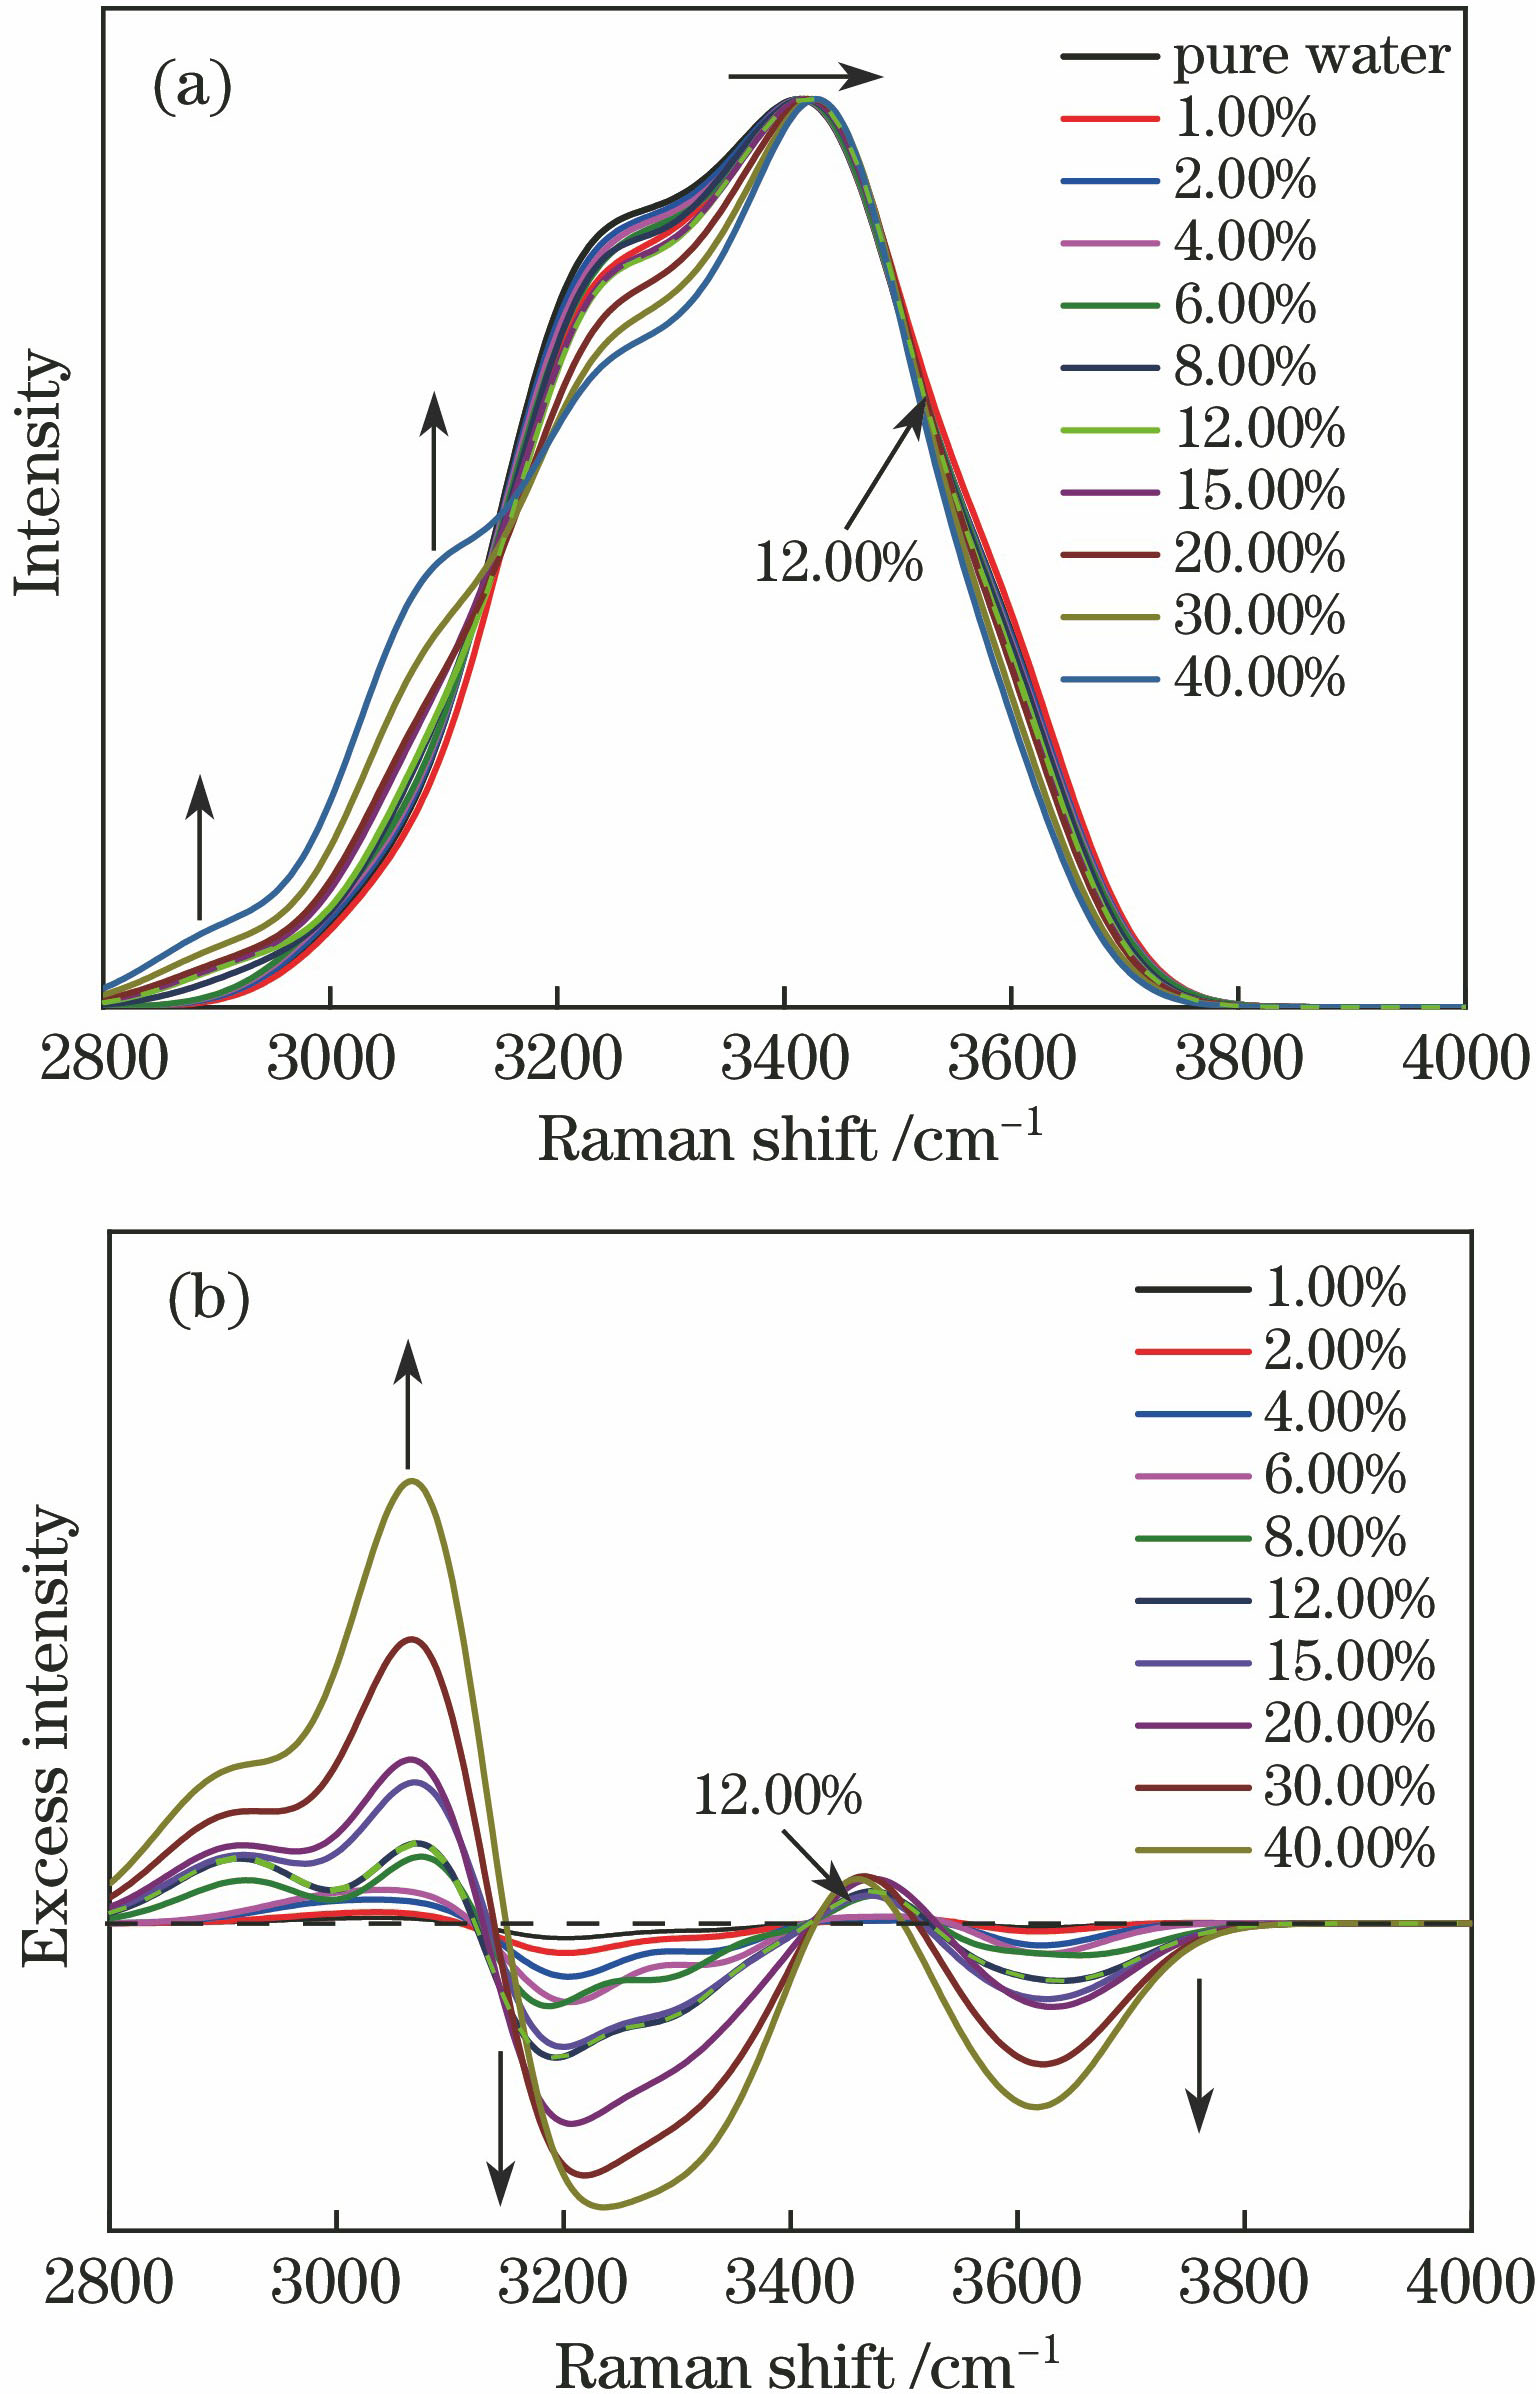 (a) Raman spectra and (b) excess Raman spectra in O-H stretching vibration interval of (NH4)2SO4 aqueous solution with different mass fractions